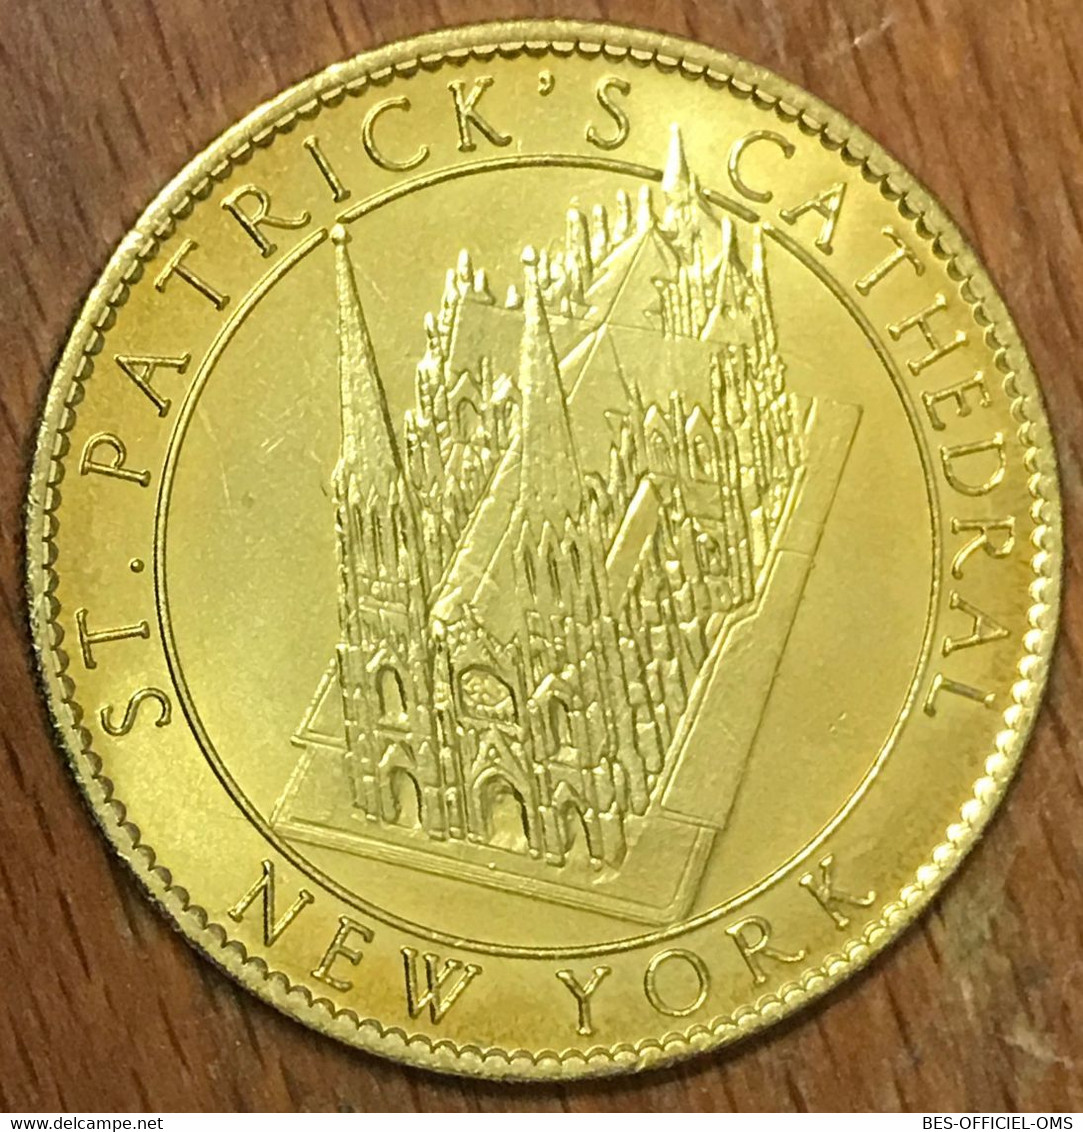 USA NEW YORK SAINT PATRICK'S CATHEDRAL PRAY FOR US AB 2014 MÉDAILLE ARTHUS BERTRAND JETON TOURISTIQUE MEDALS TOKENS COIN - 2014